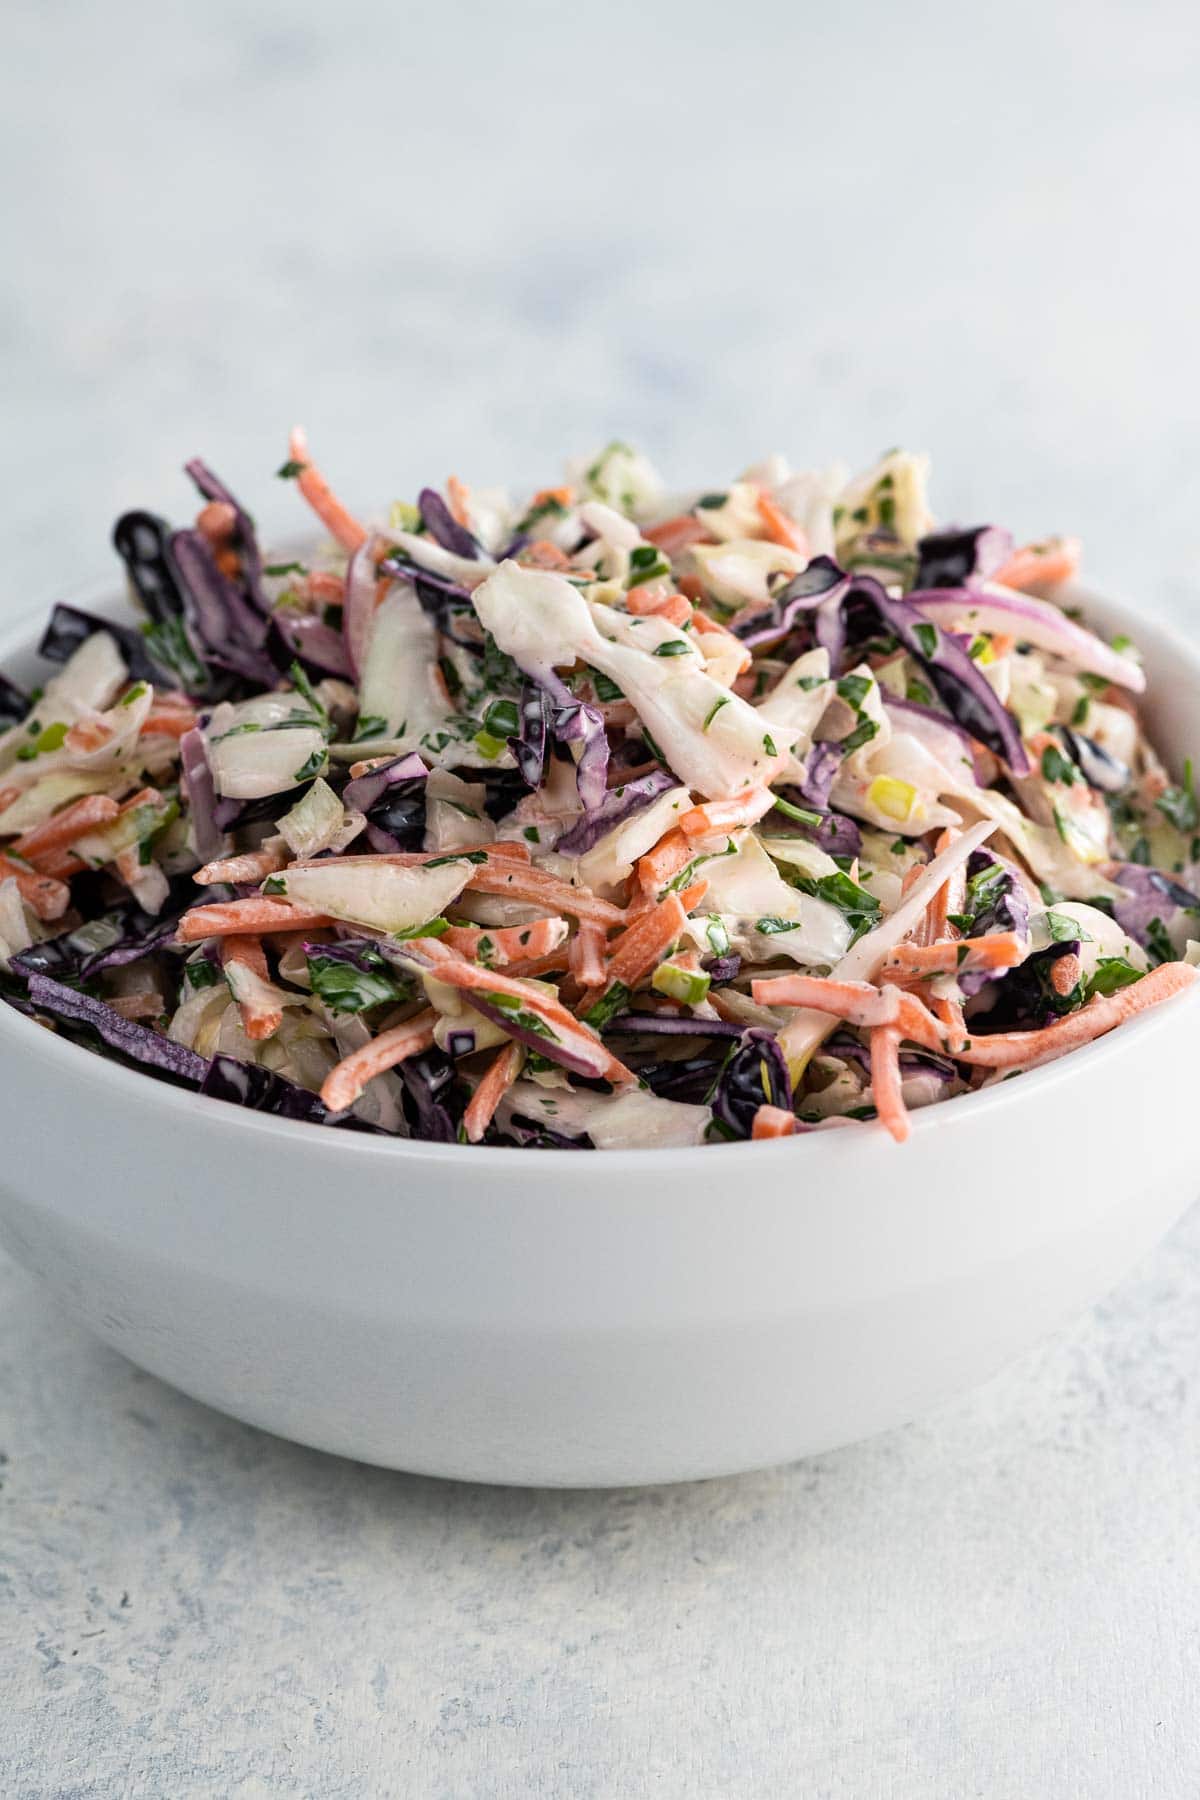 Southern style coleslaw in a white bowl